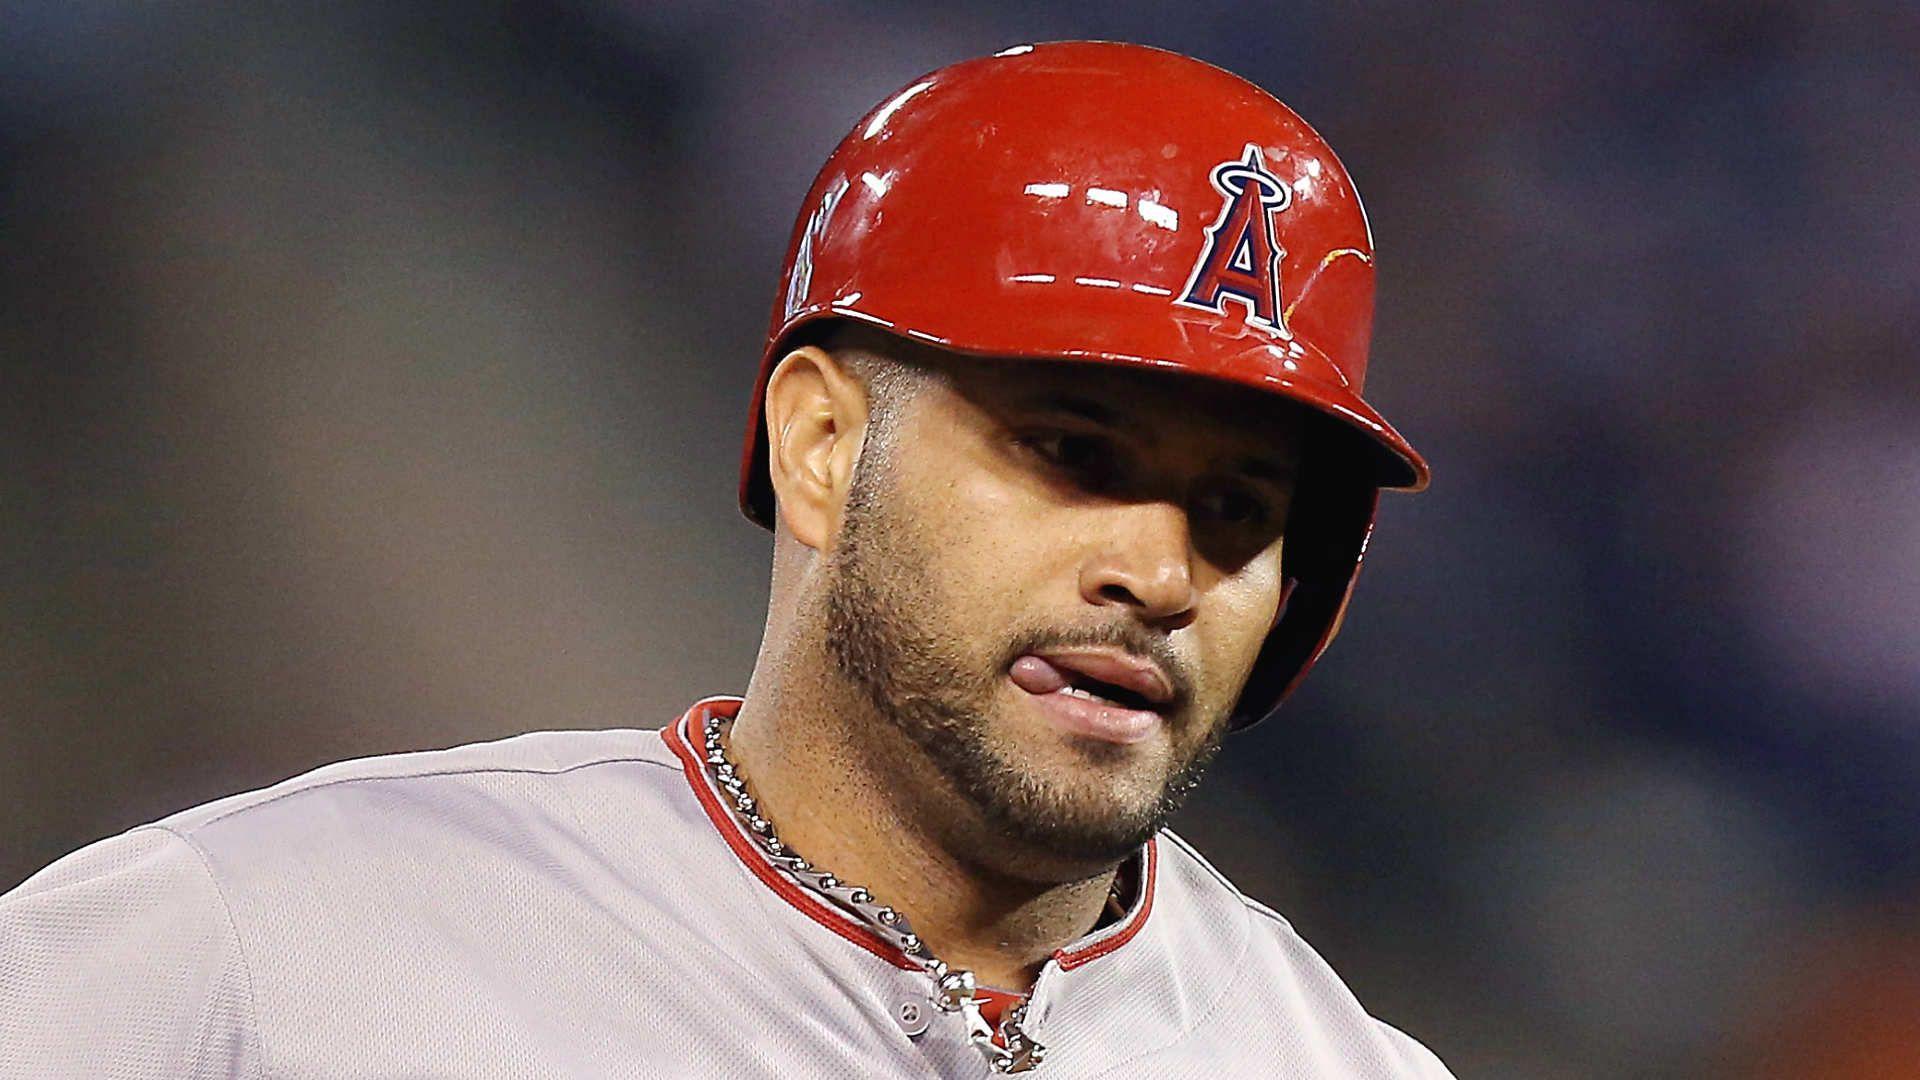 Angels relieved after Albert Pujols' negative MRI results. MLB